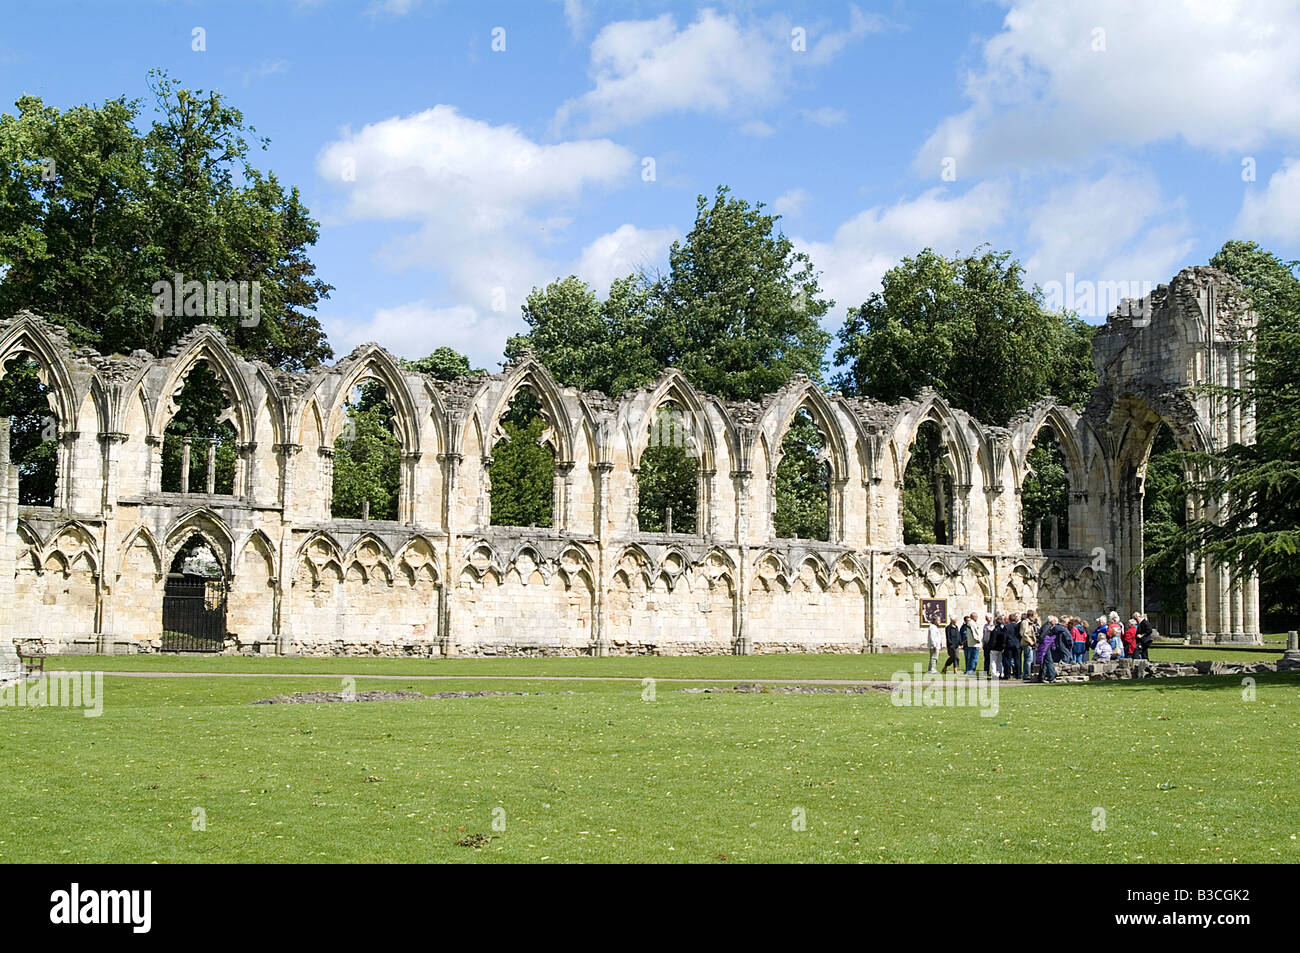 St Mary's Abbey museum gardens york north yorkshire gb tourist attraction attractions tourism visitors Stock Photo